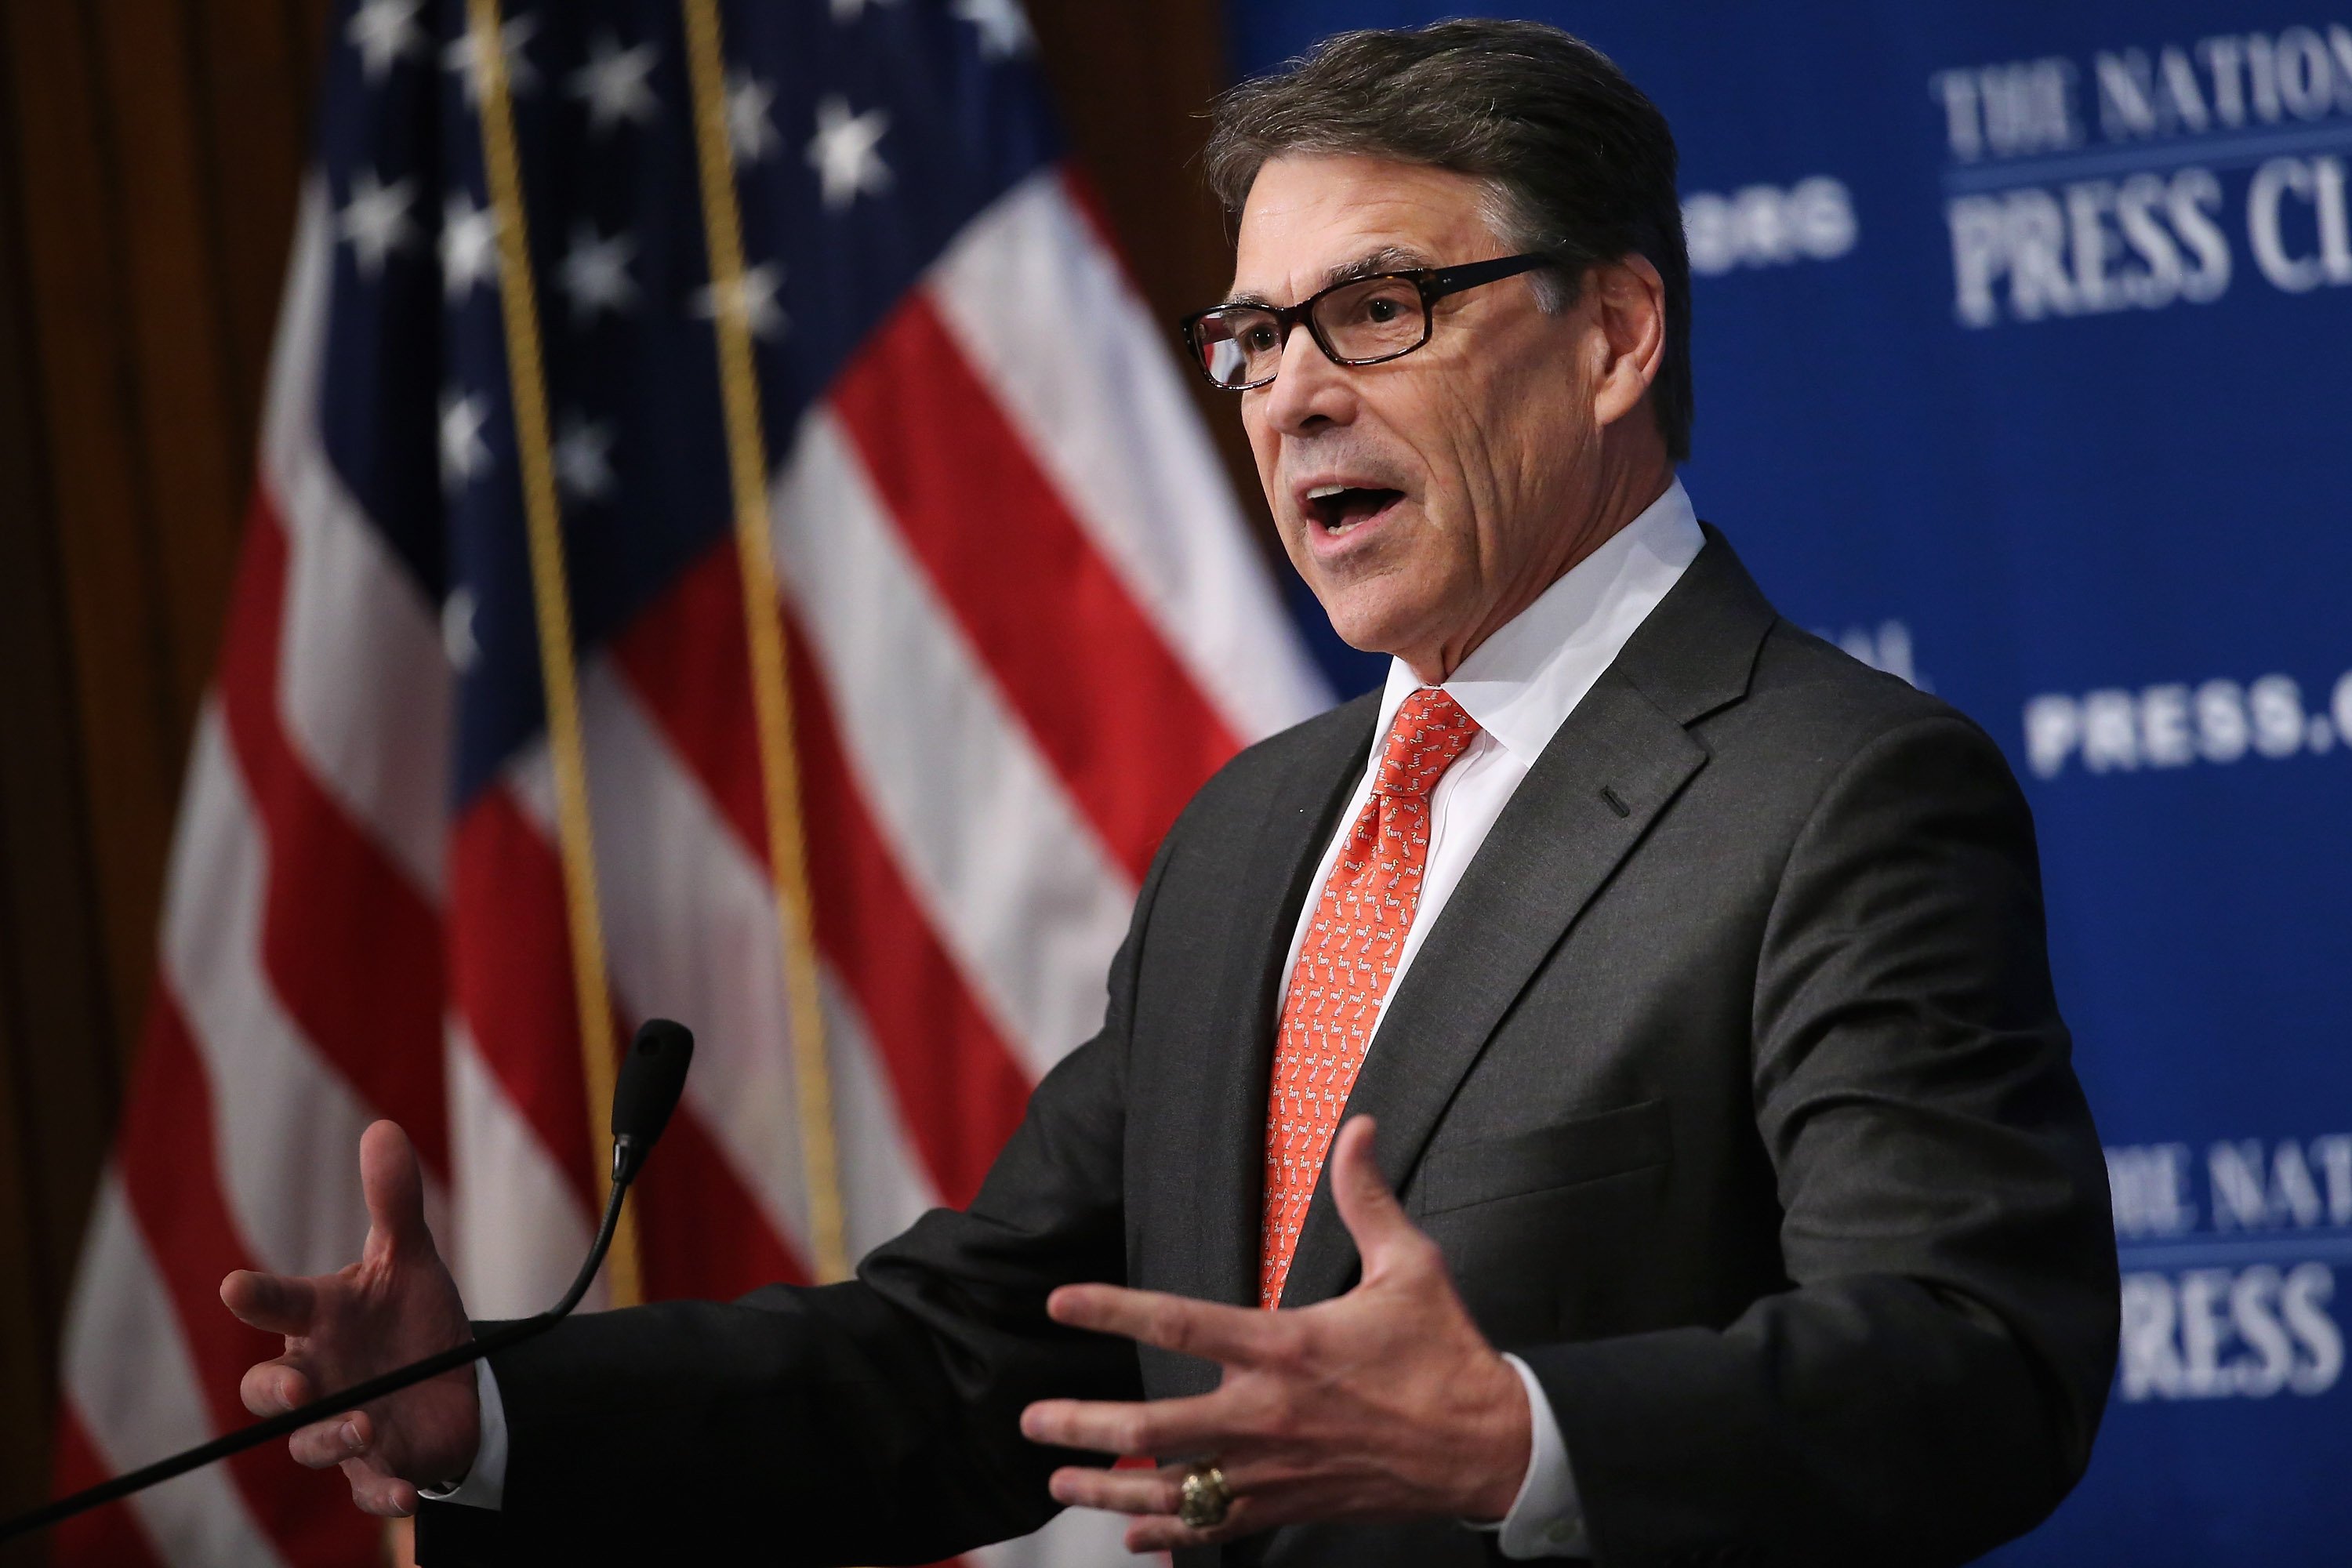 Former Texas Governor and Republican presidential candidate Rick Perry addresses the National Press Club Luncheon July 2, 2015 in Washington. (Chip Somodevilla—Getty Images)